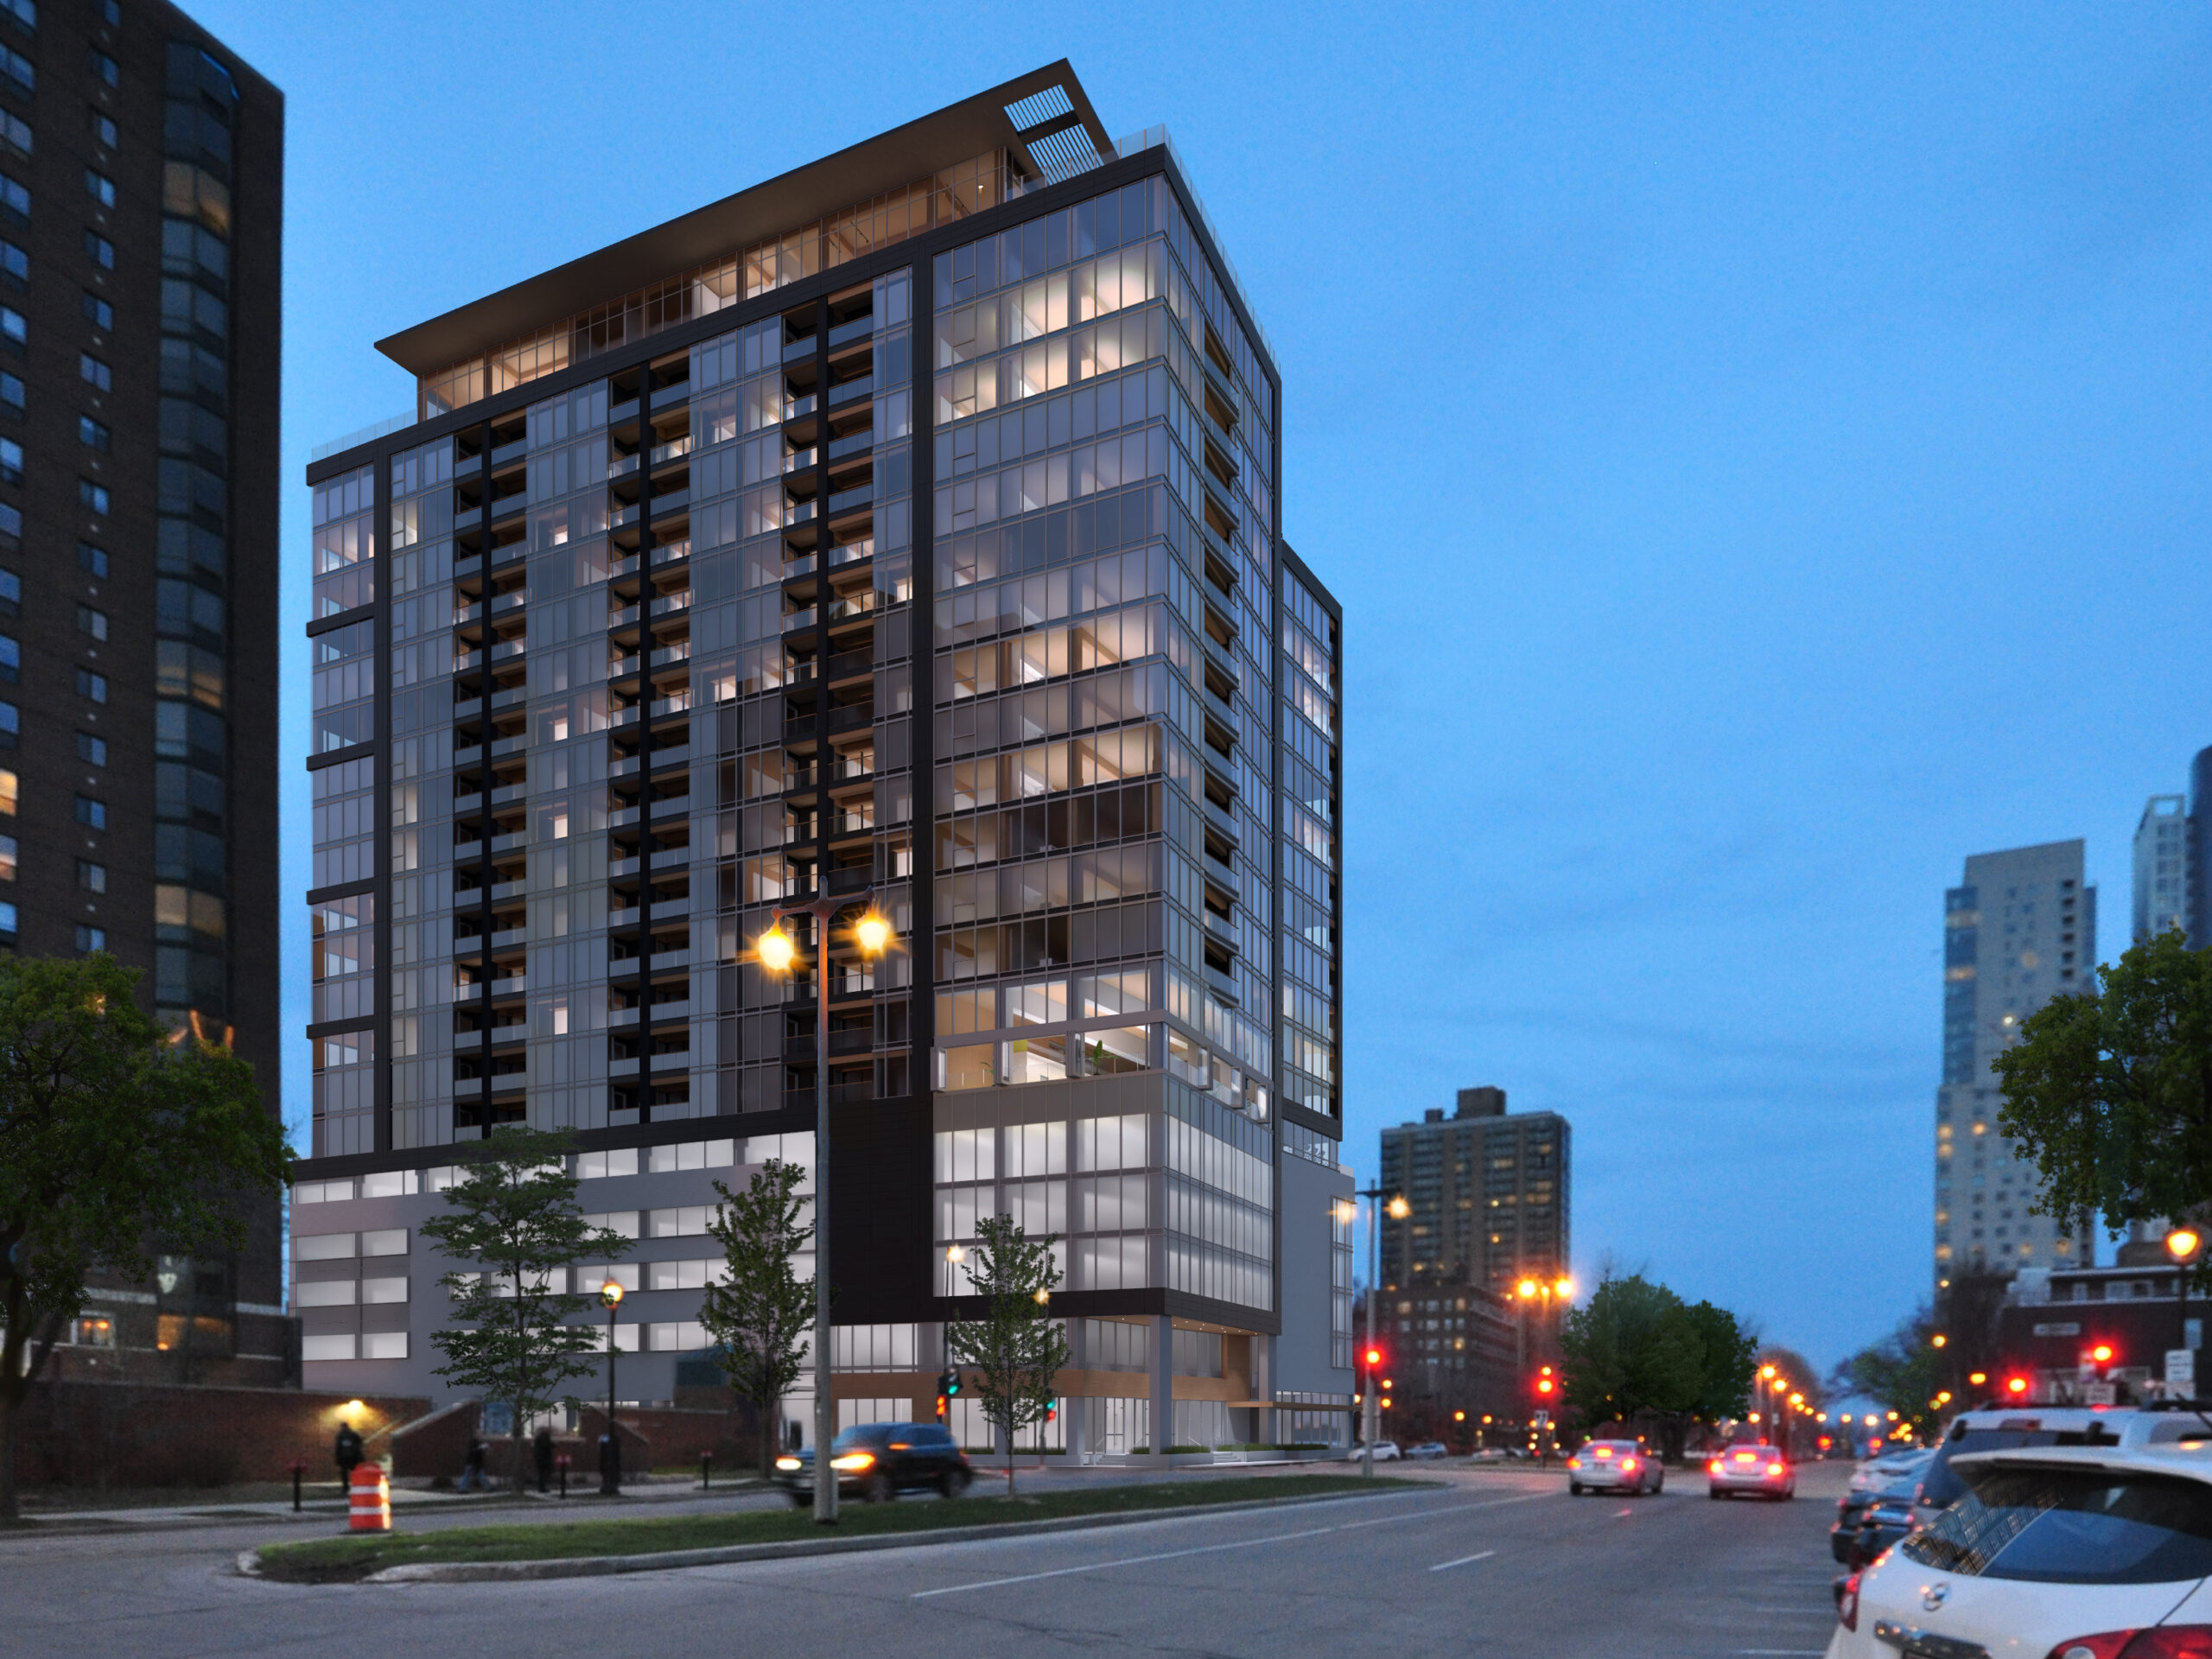 Milwaukee Developer Wants To Build One Of World’s Tallest Wooden Structures